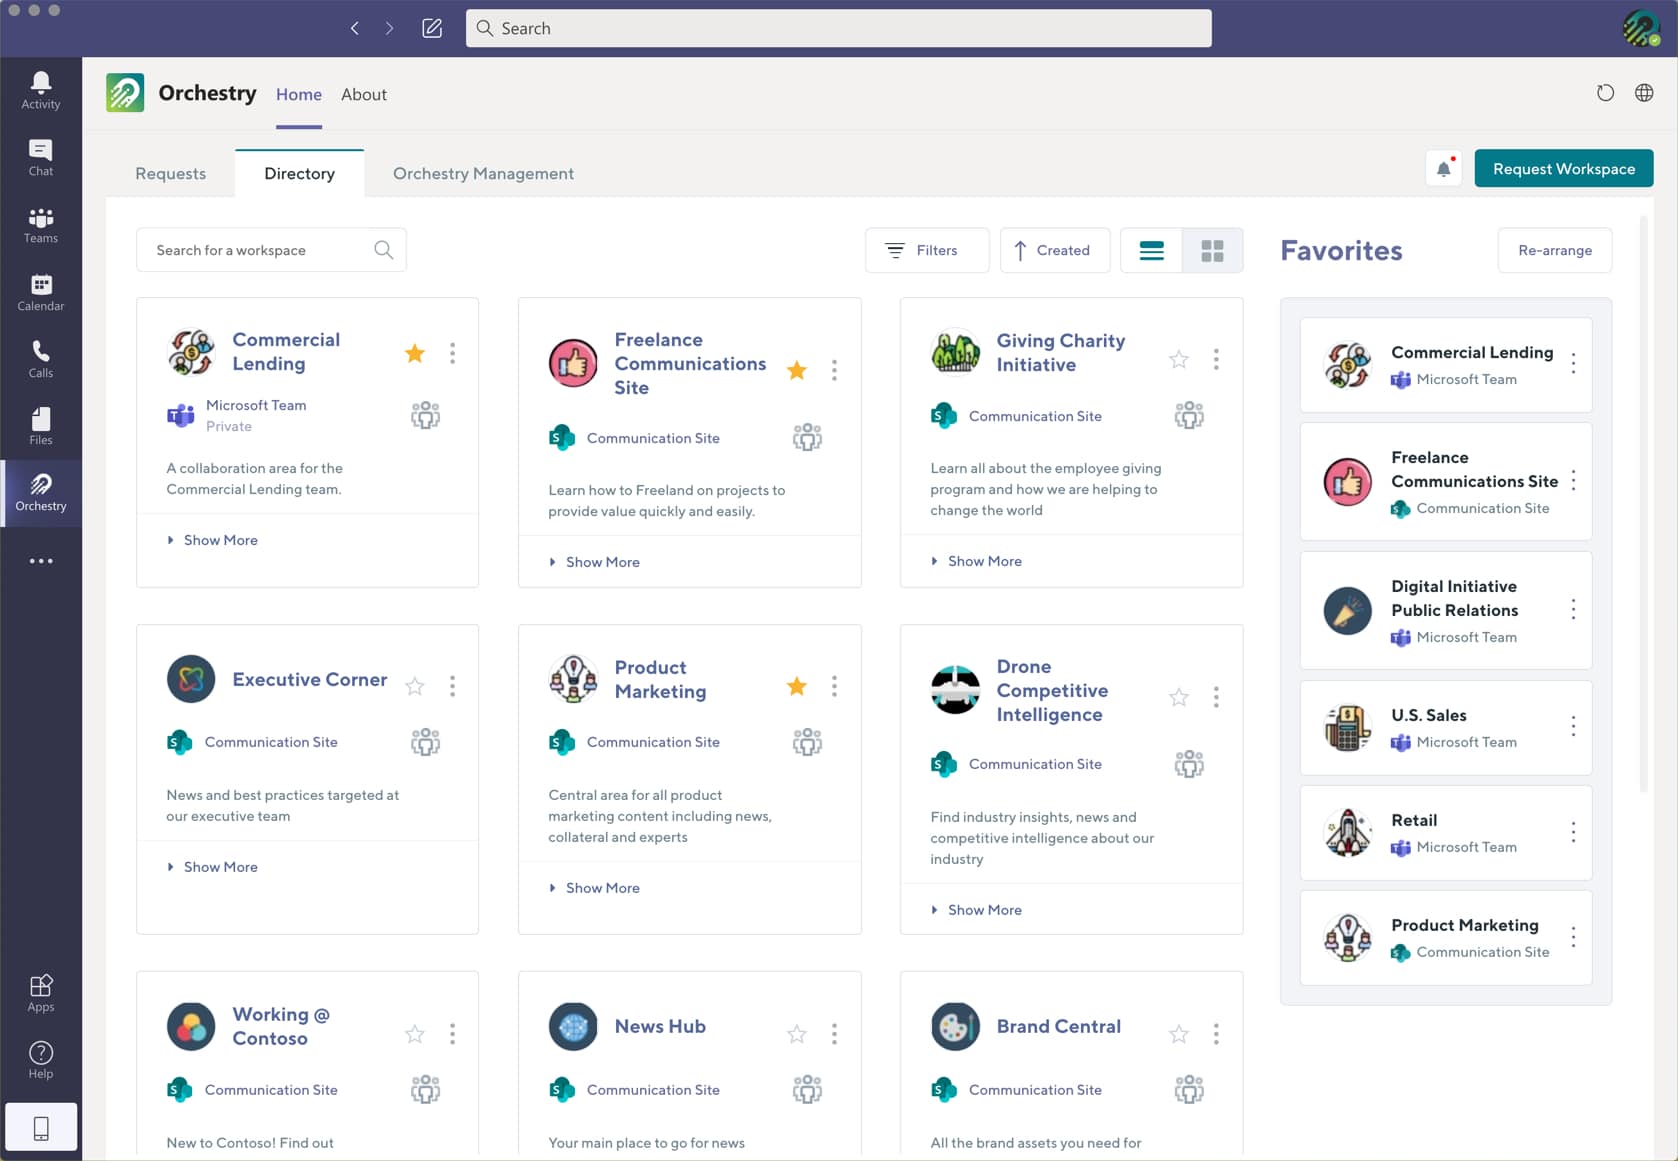 Orchestry's SharePoint and Microsoft Teams directory